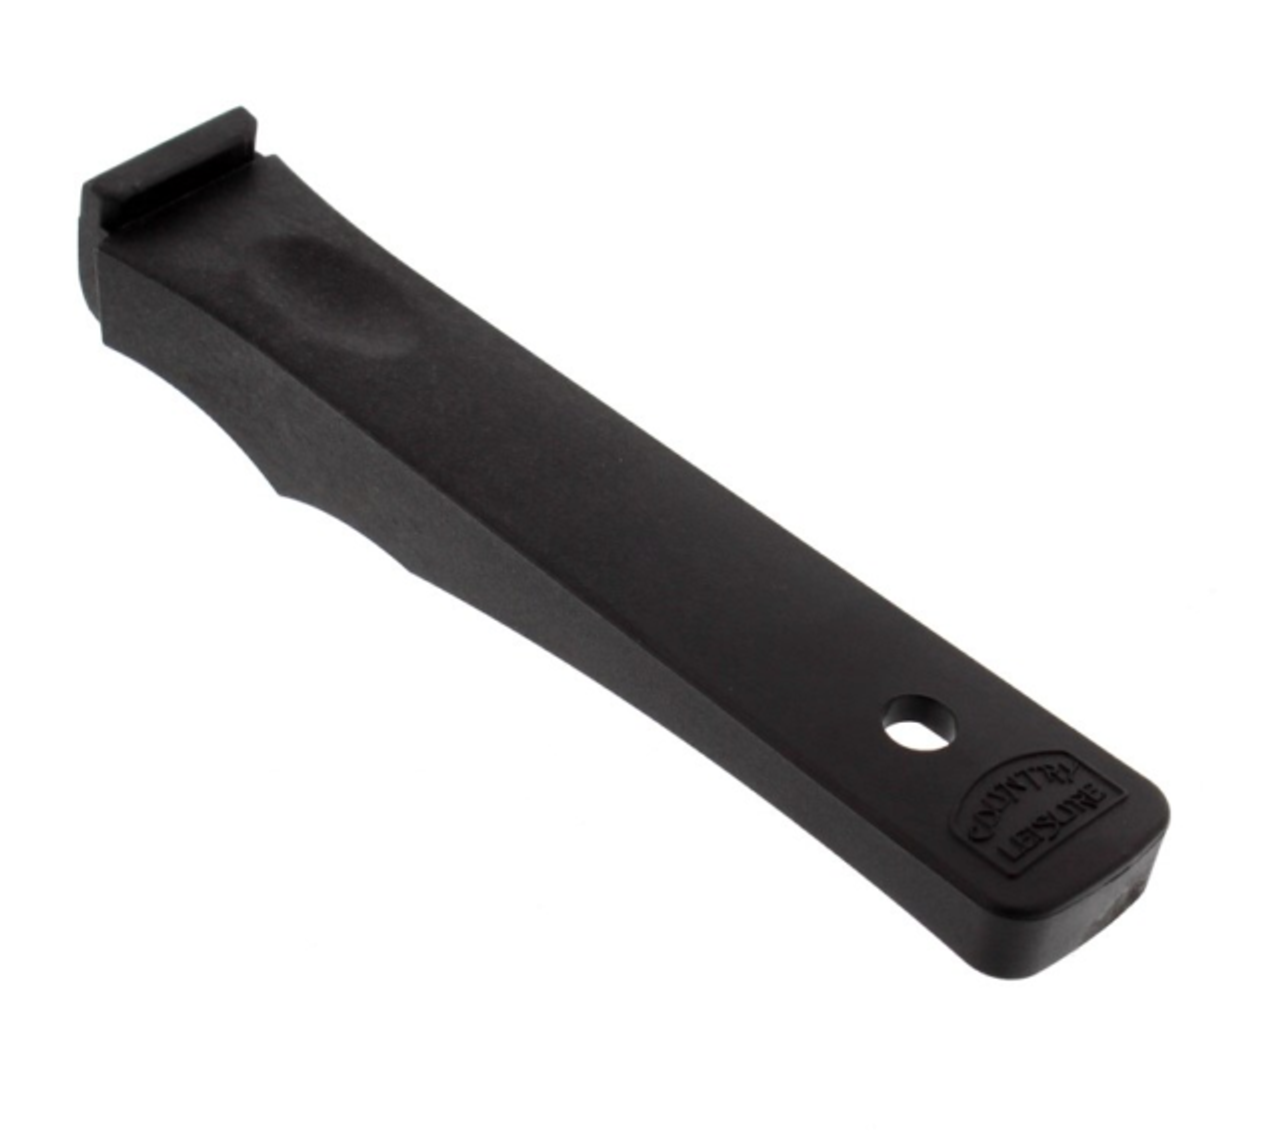 Thetford Plastic Handle For Grill Pan. Spcc1186 | 700-04665